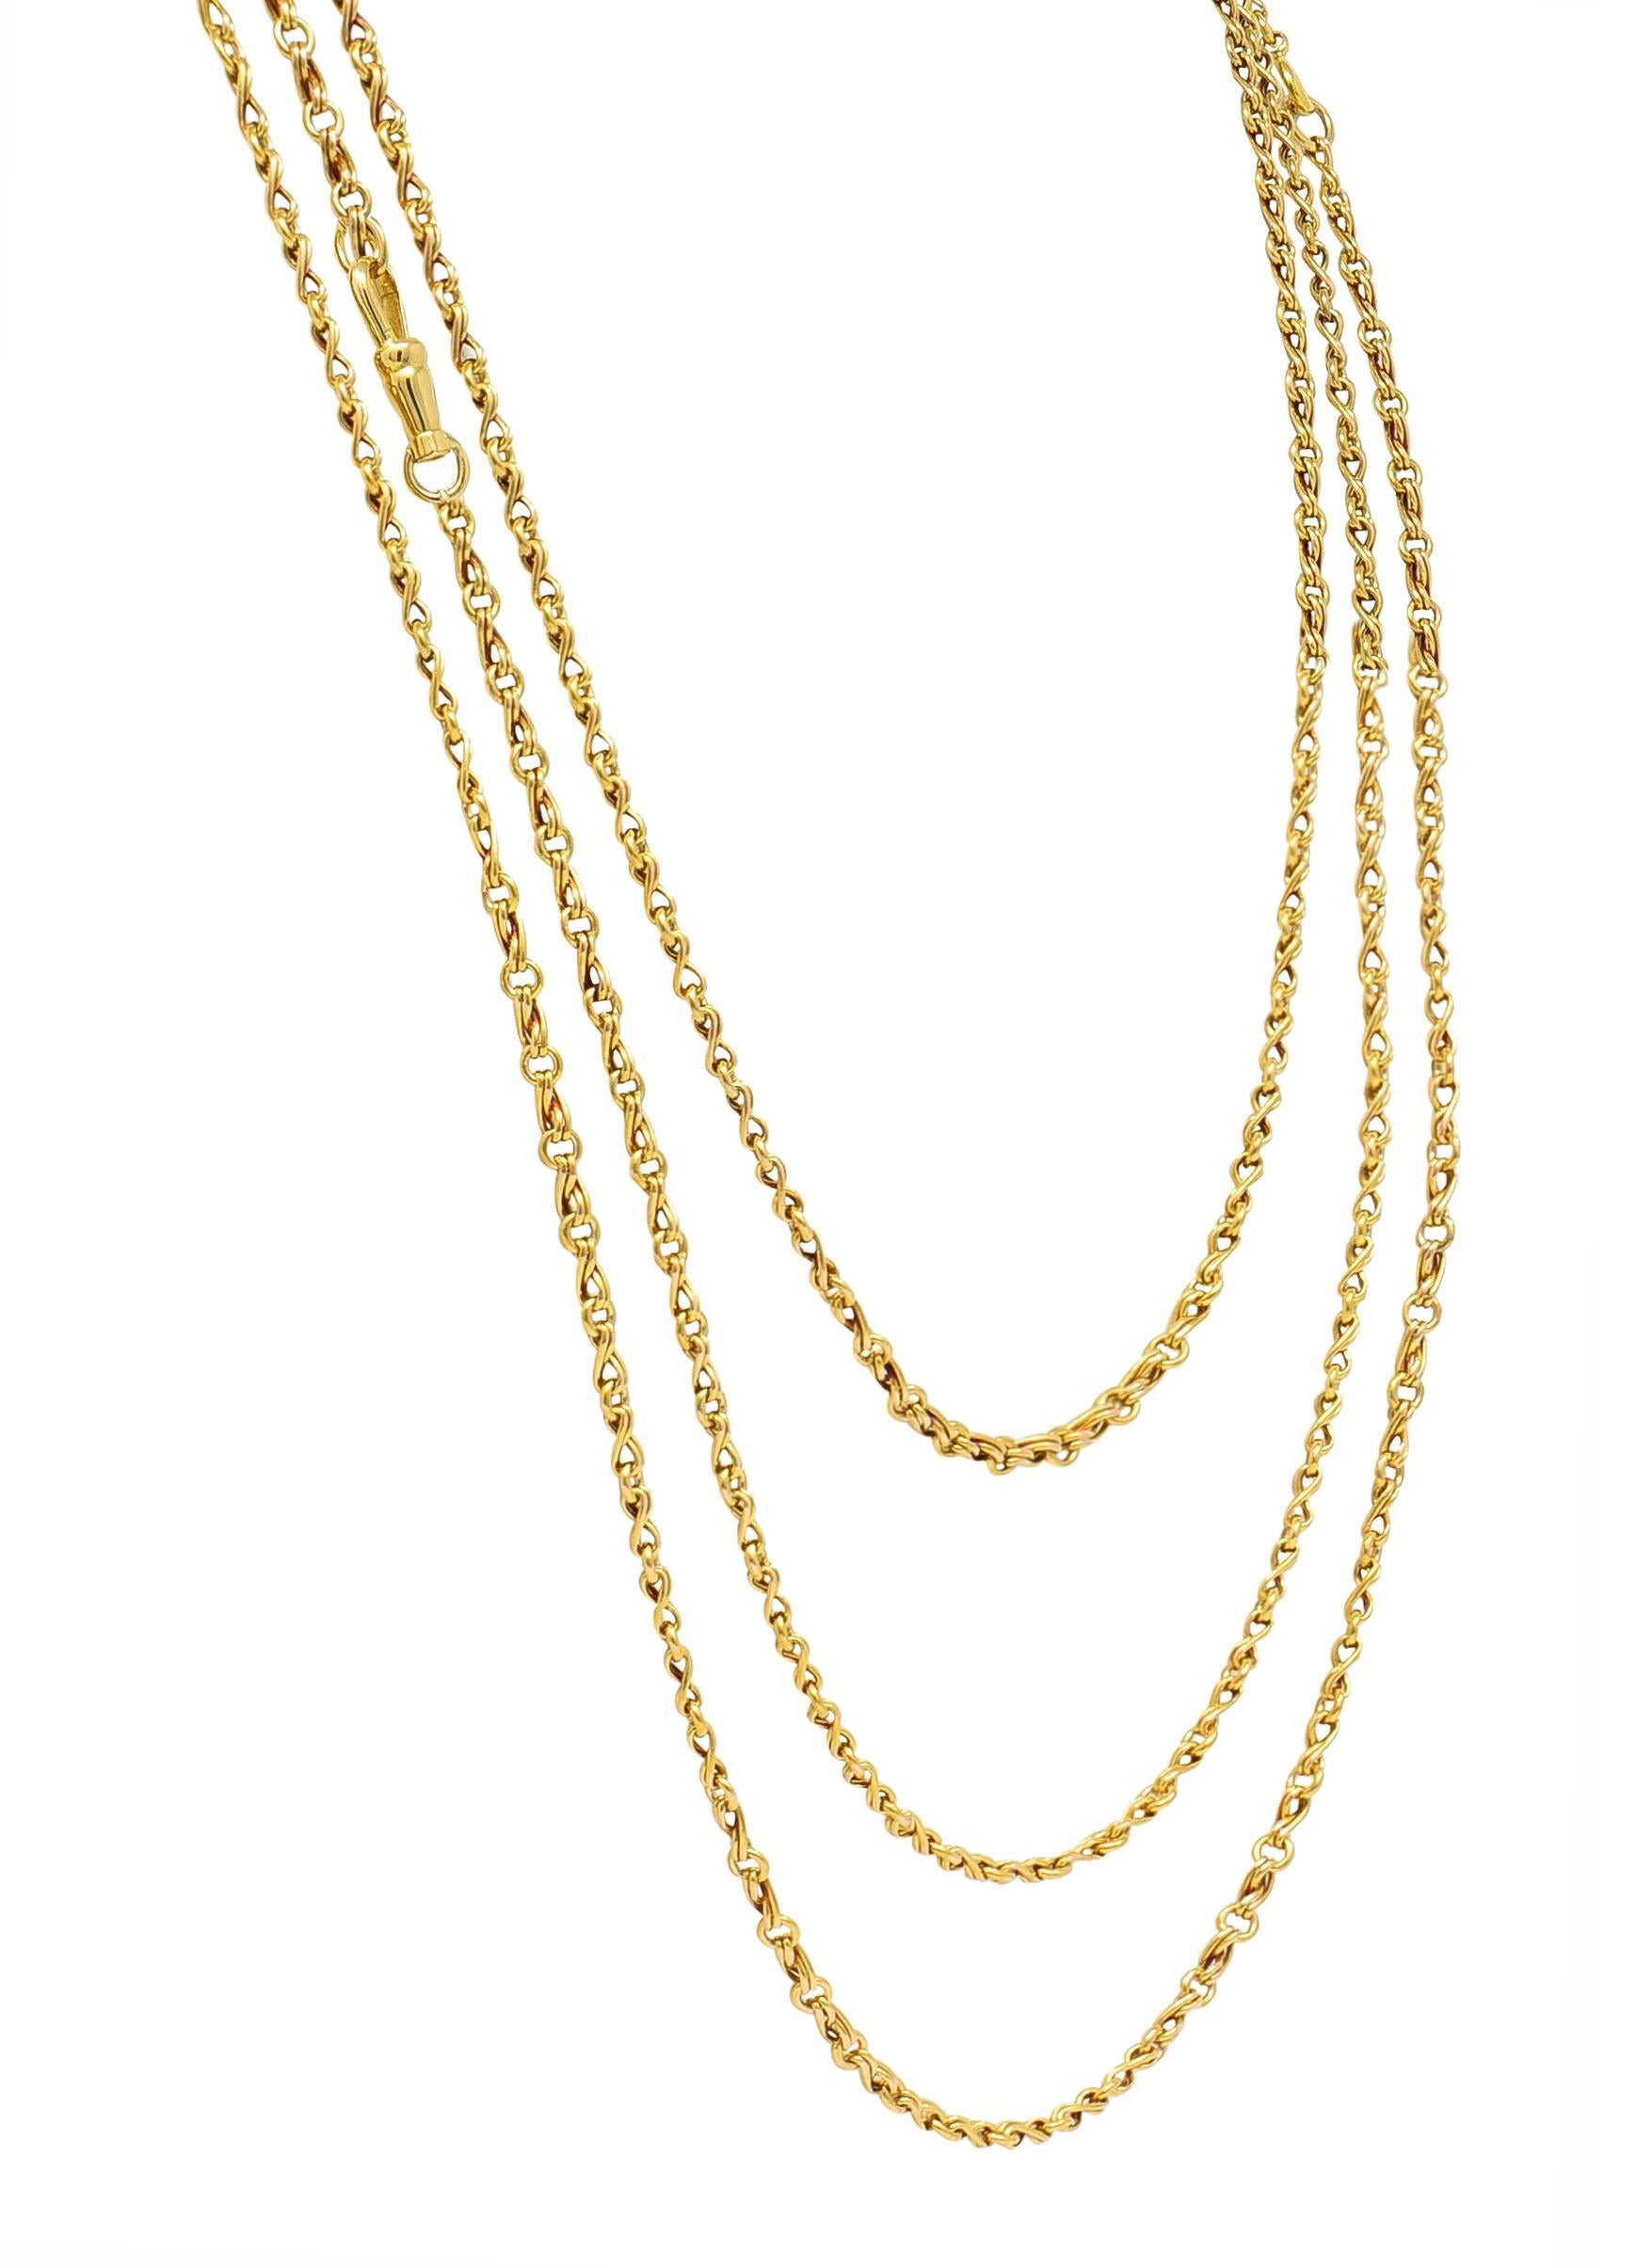 Victorian 18 Karat Yellow Gold Infinity Link 66.5 IN Long Antique Chain Necklace For Sale 1